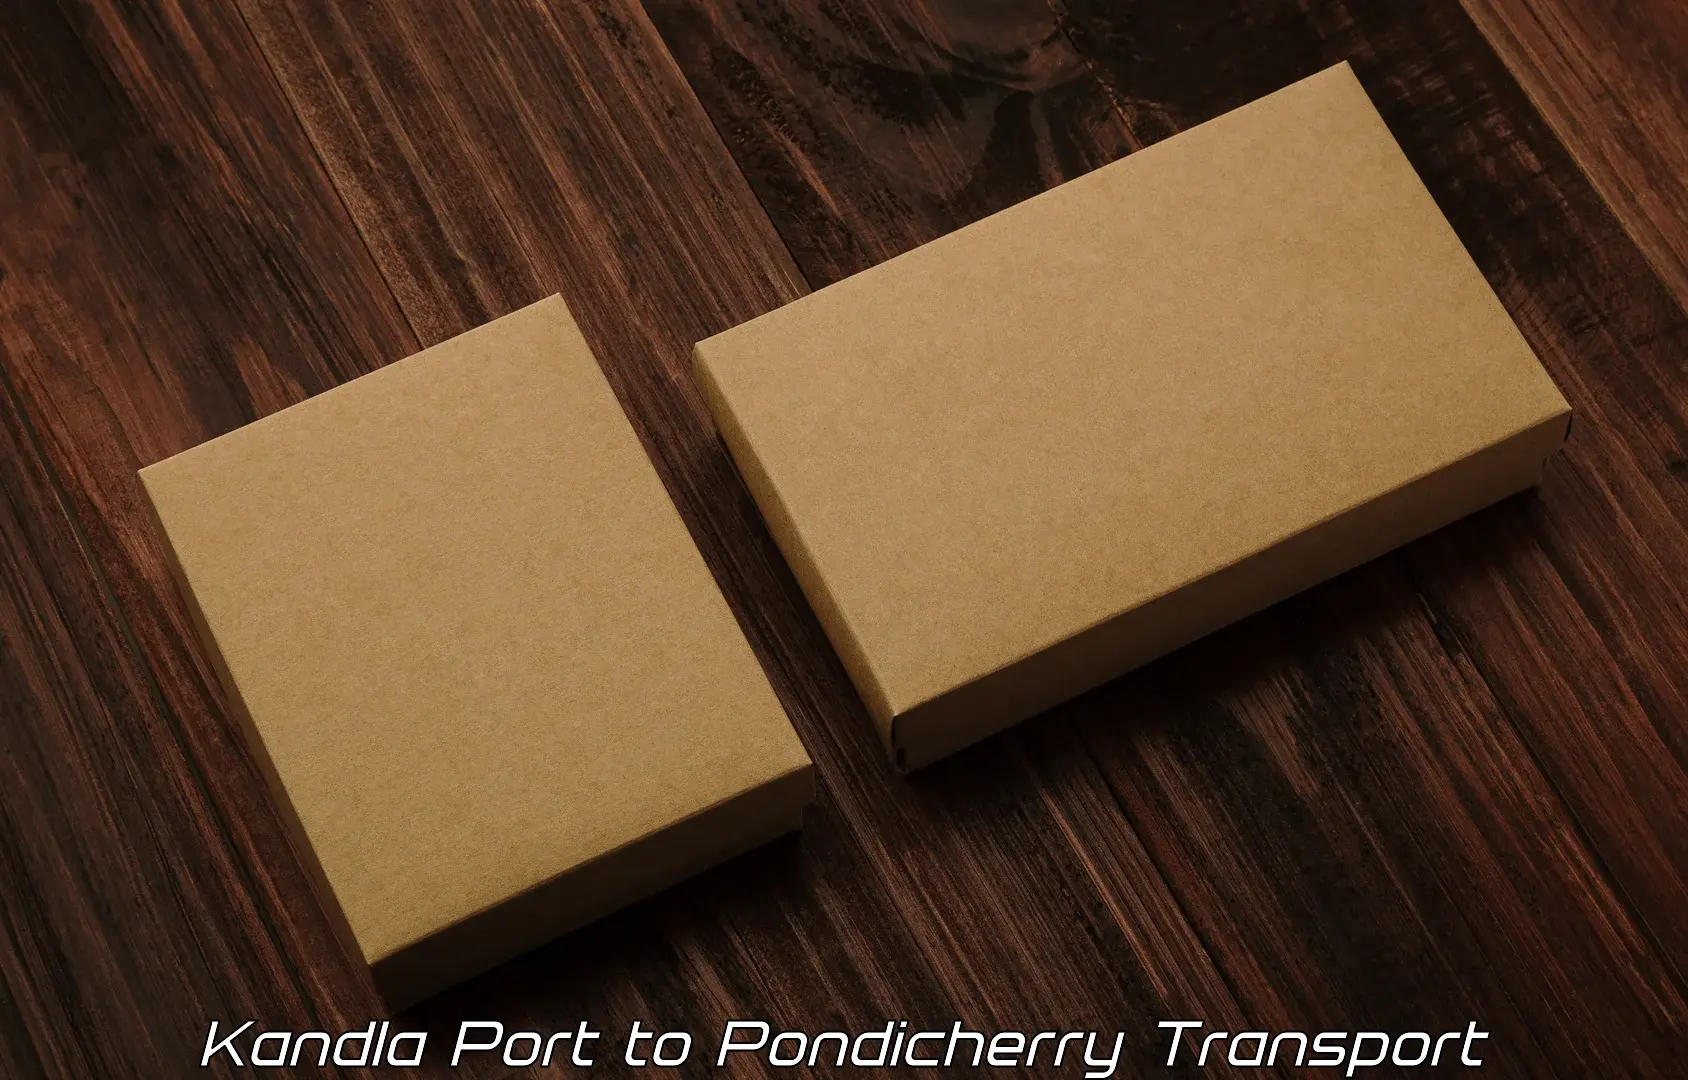 Air freight transport services in Kandla Port to Pondicherry